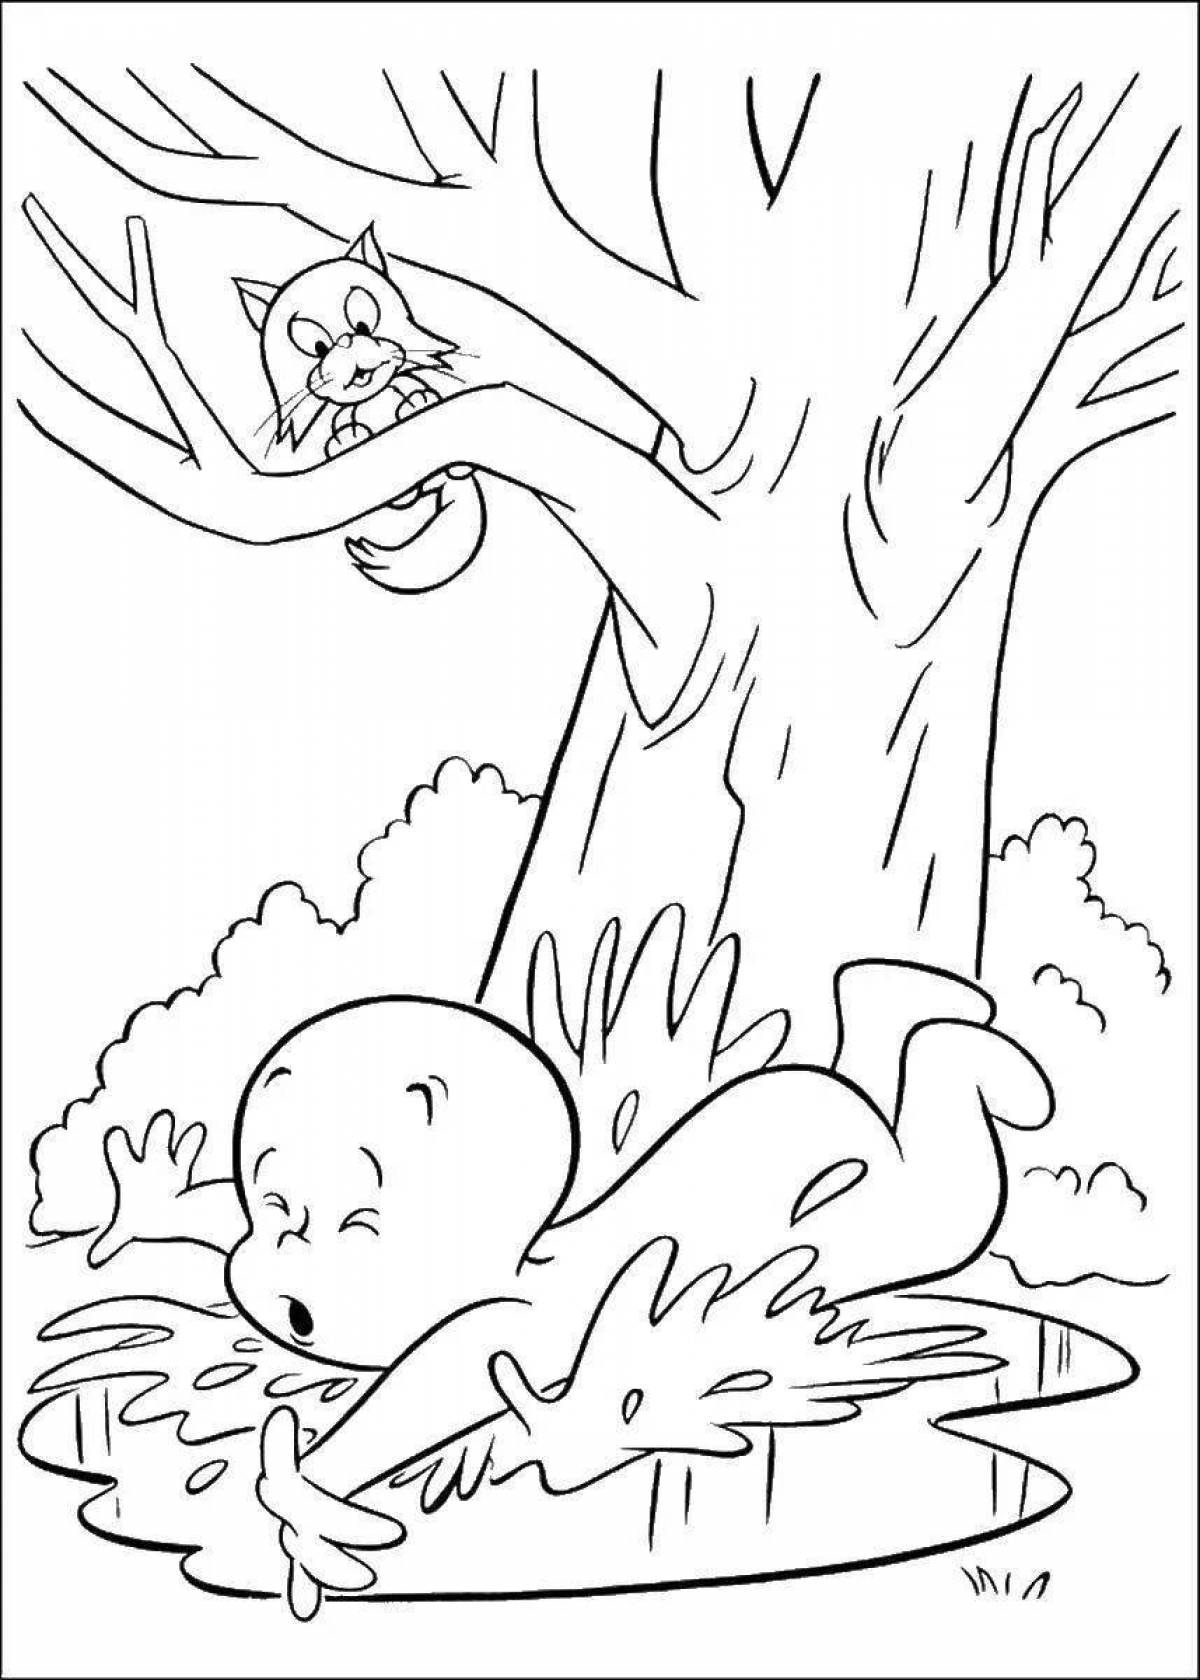 Glowing puddle coloring page